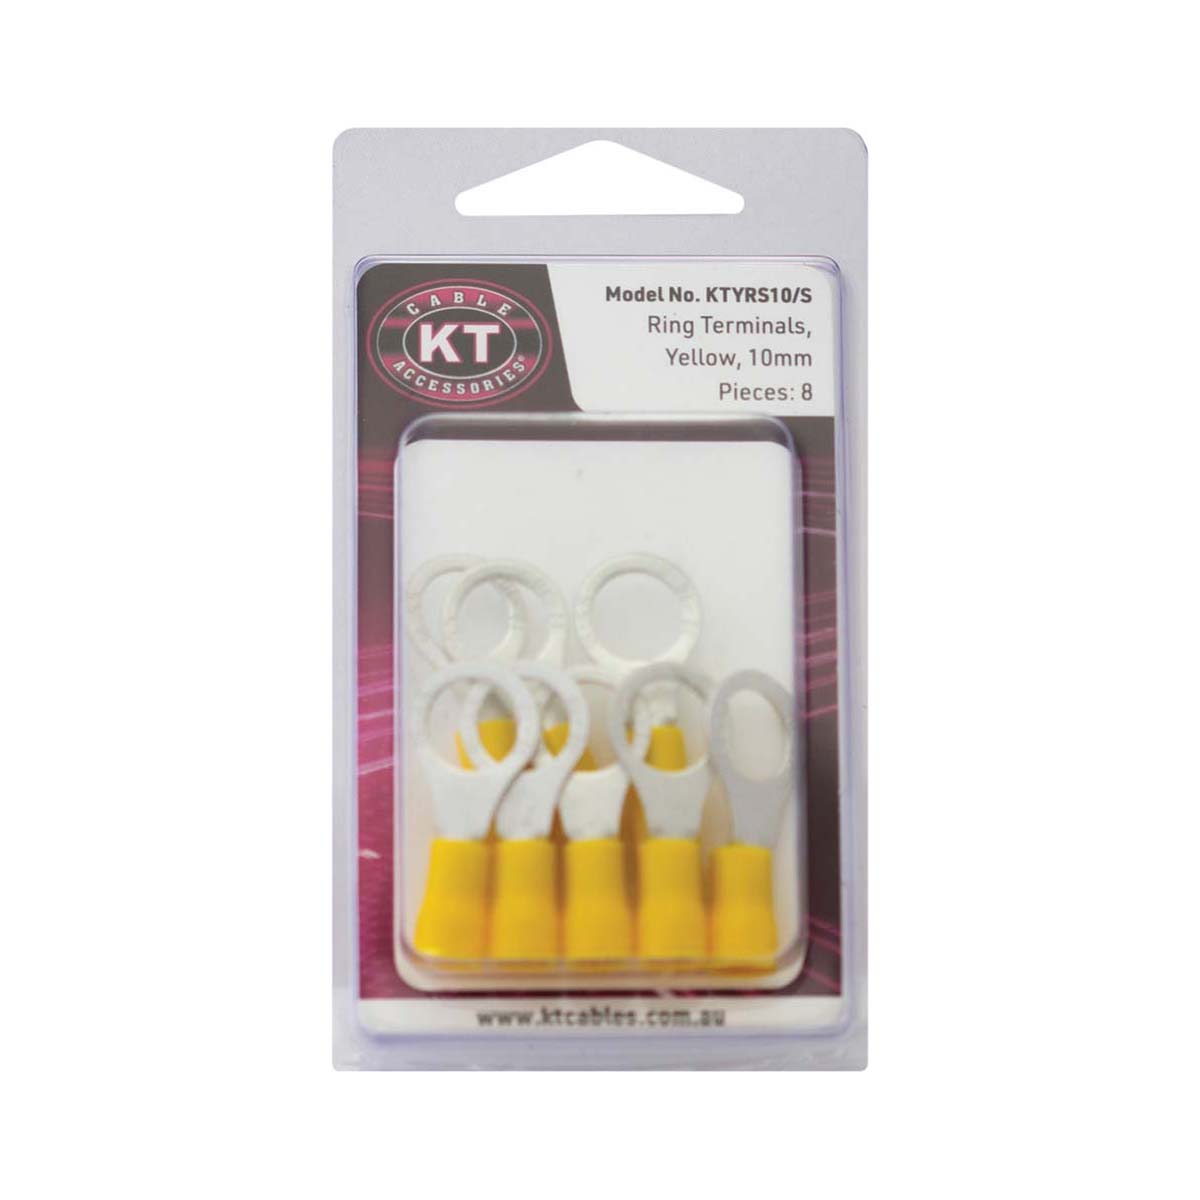 KT Cables Insulated Ring Terminal Yellow 6.0 10mm